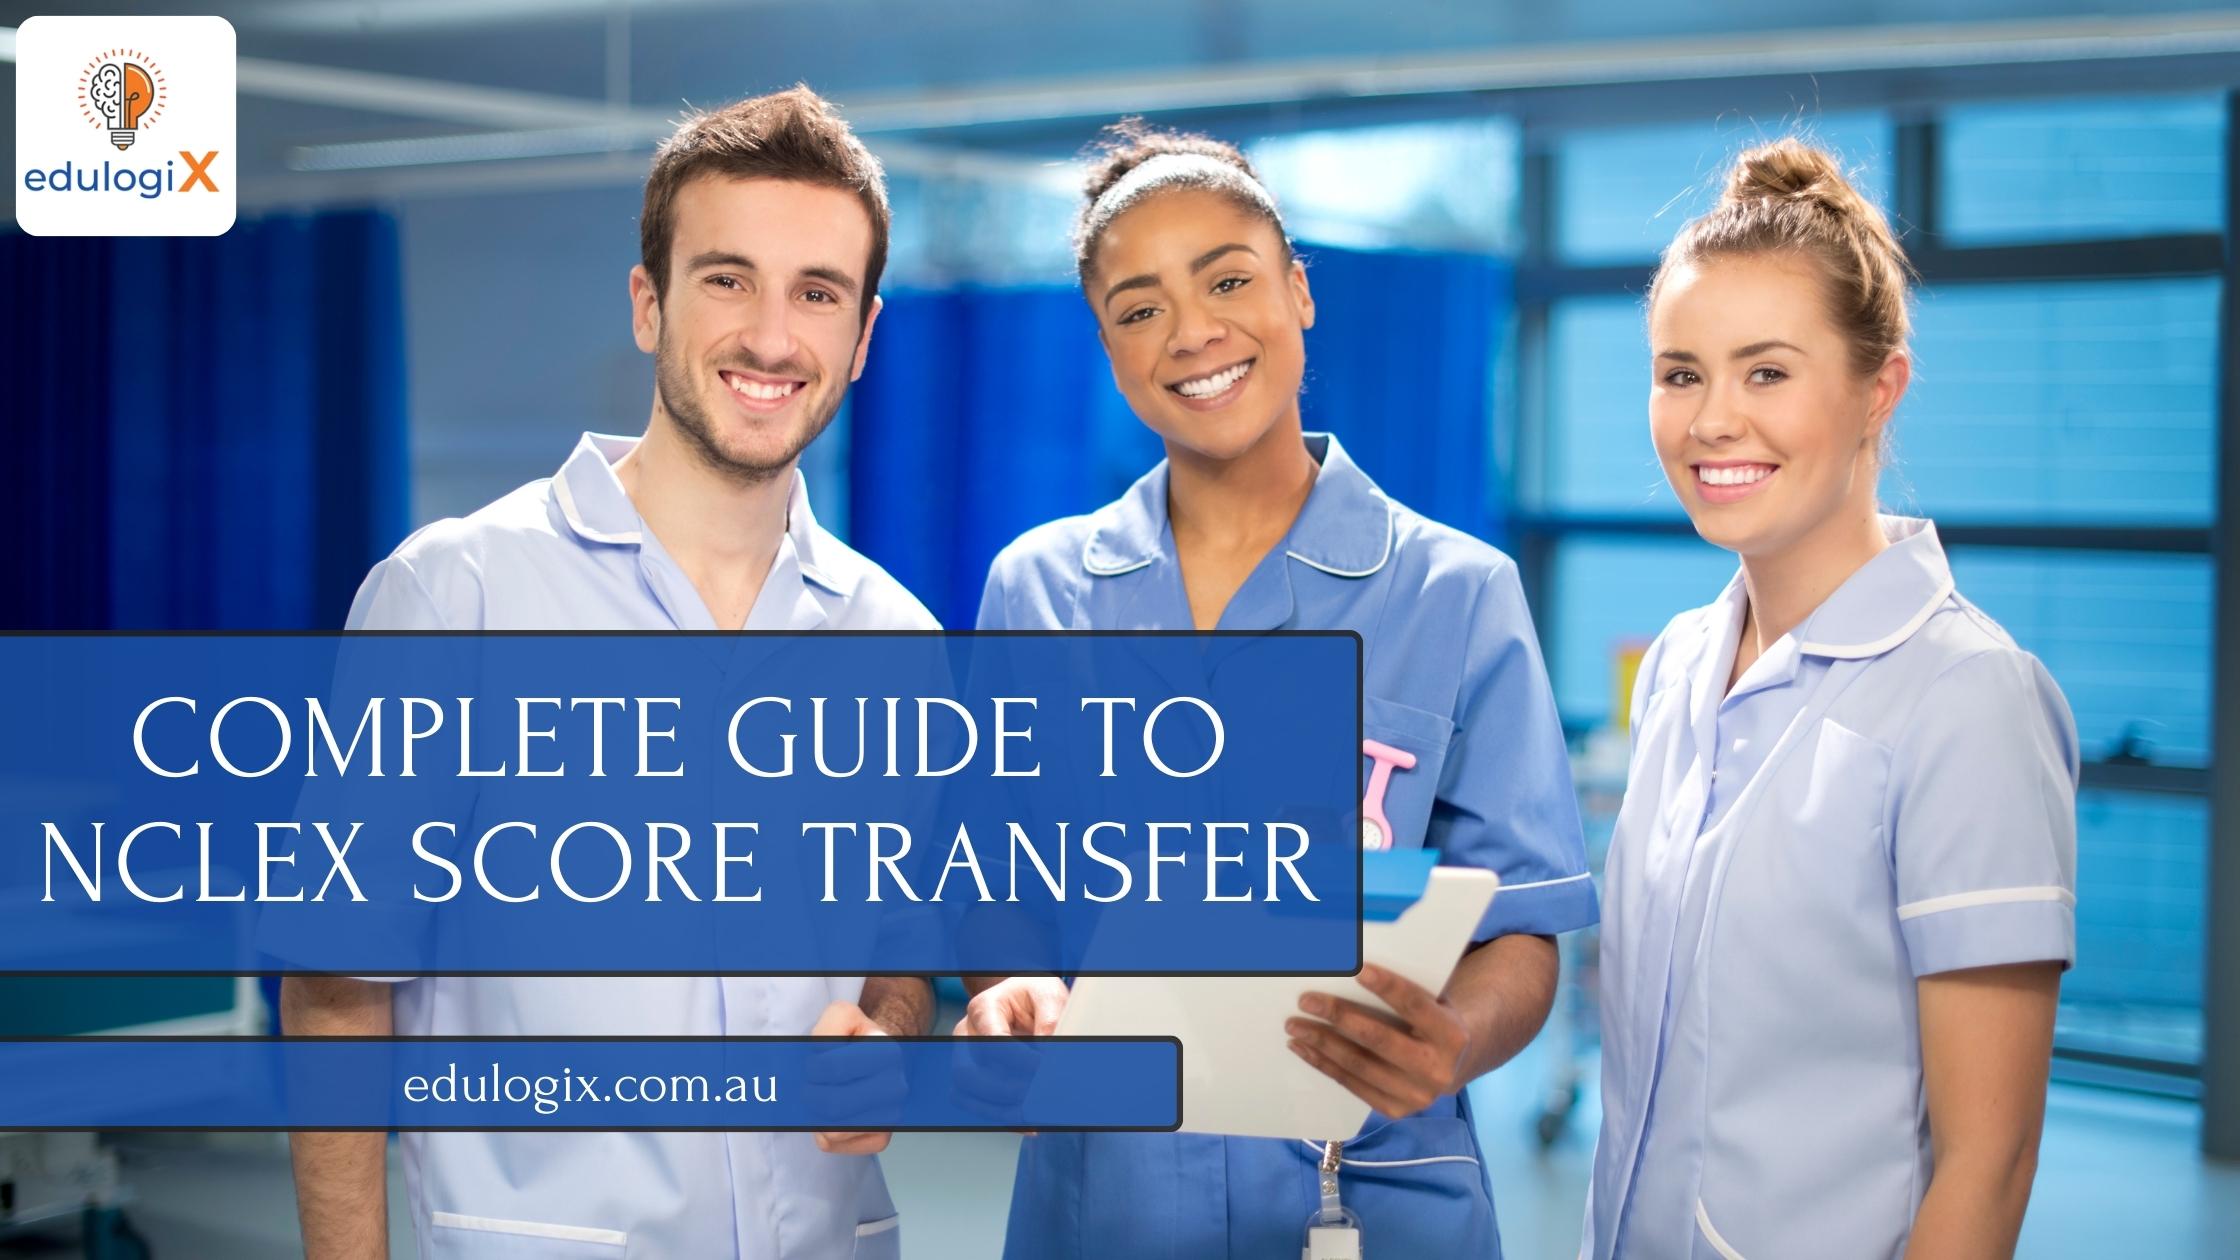 The Complete Guide to NCLEX Score Transfer: AHPRA to USA/Canada and Vice Versa